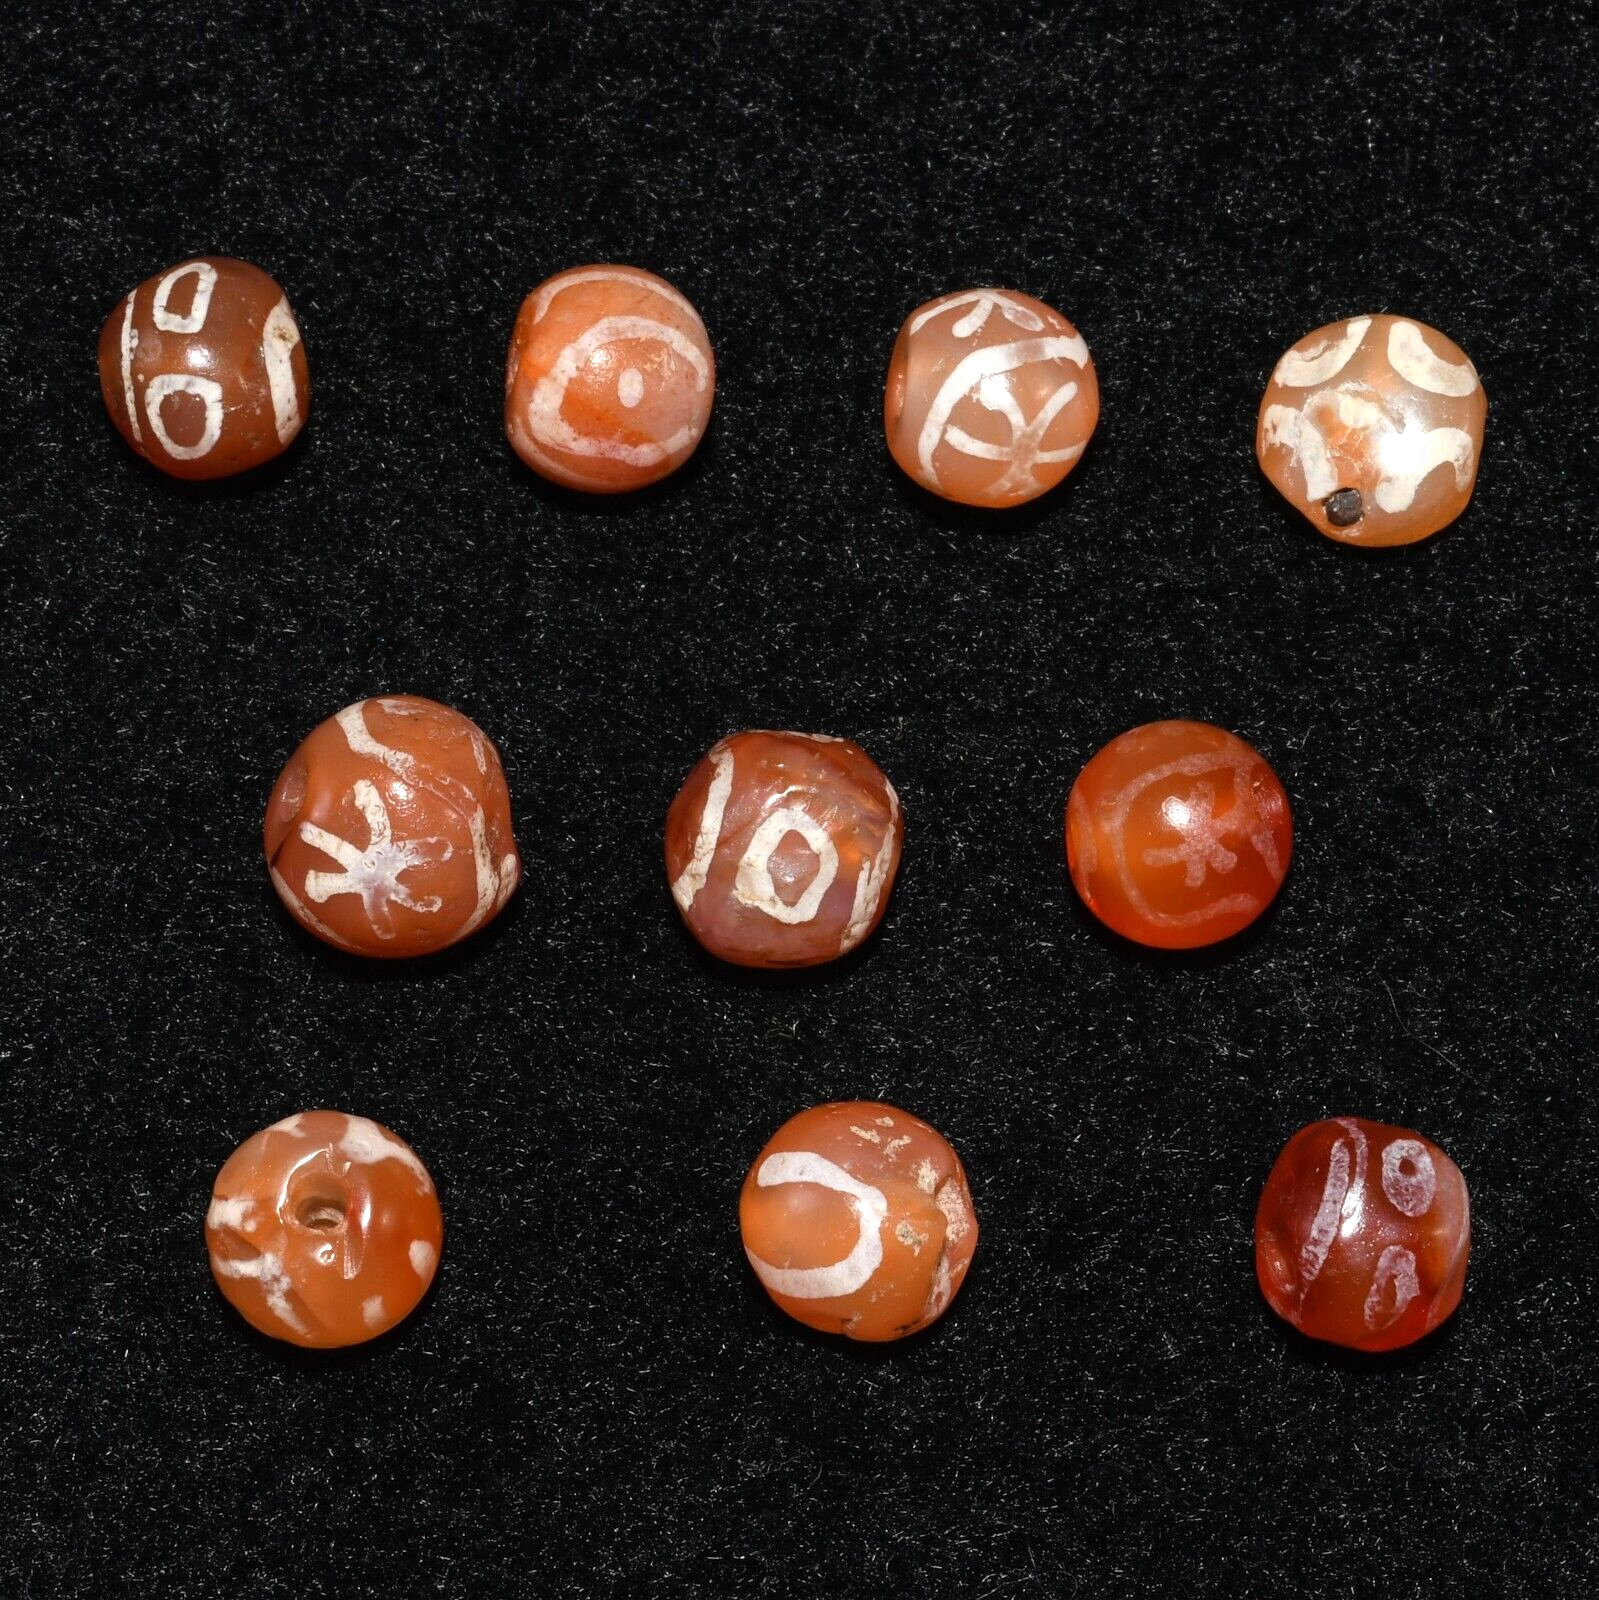 Authentic 10 Ancient Indus Valley Etched Round Carnelian Beads Ca. 2600-1700 BCE Без бренда